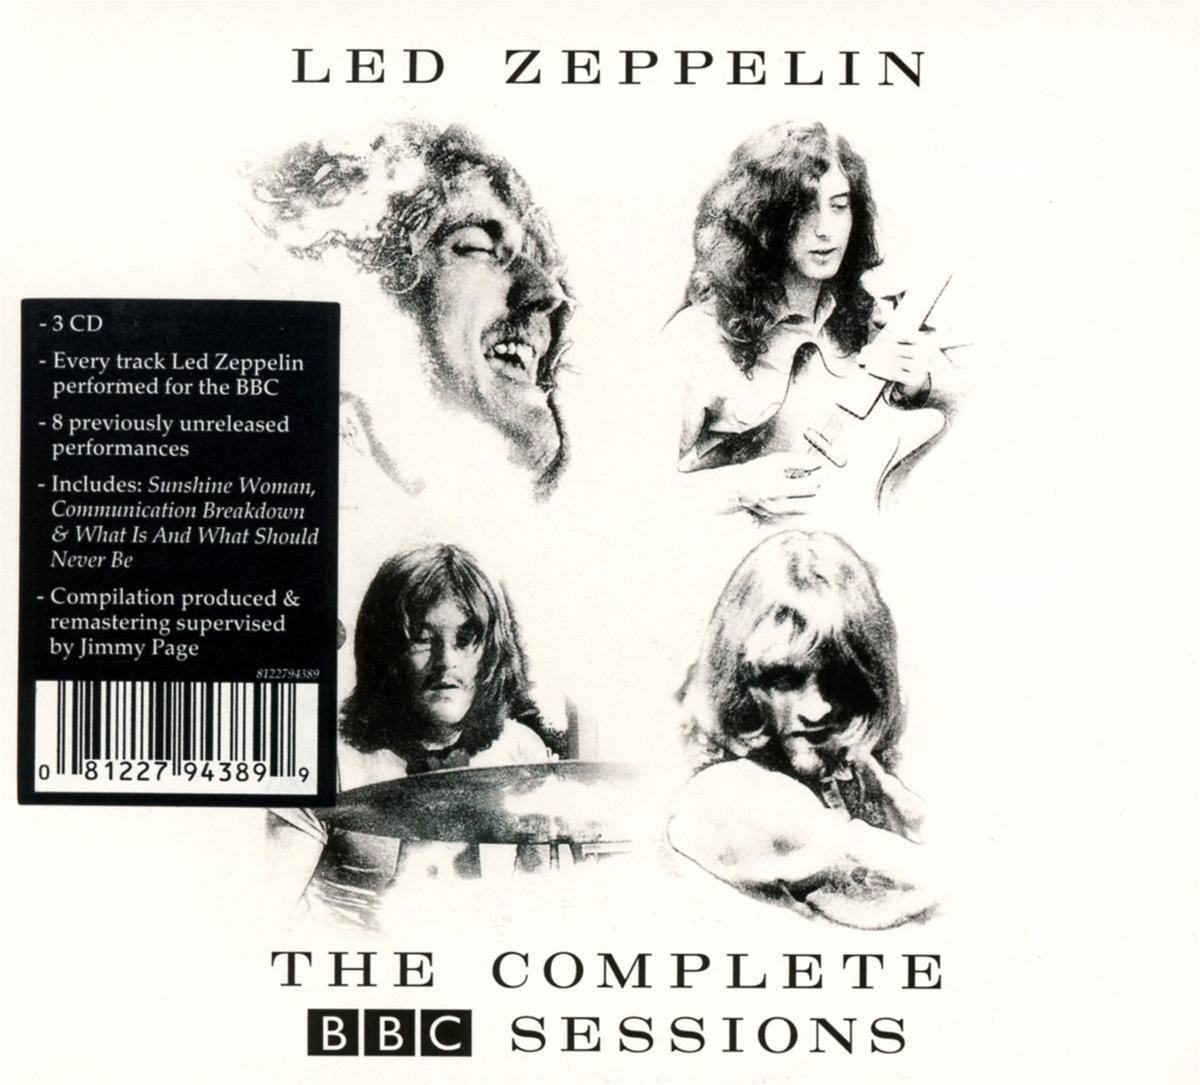 The Complete BBC Sessions (Deluxe Edition), Led Zeppelin | CD (album) |  Musique | bol.com